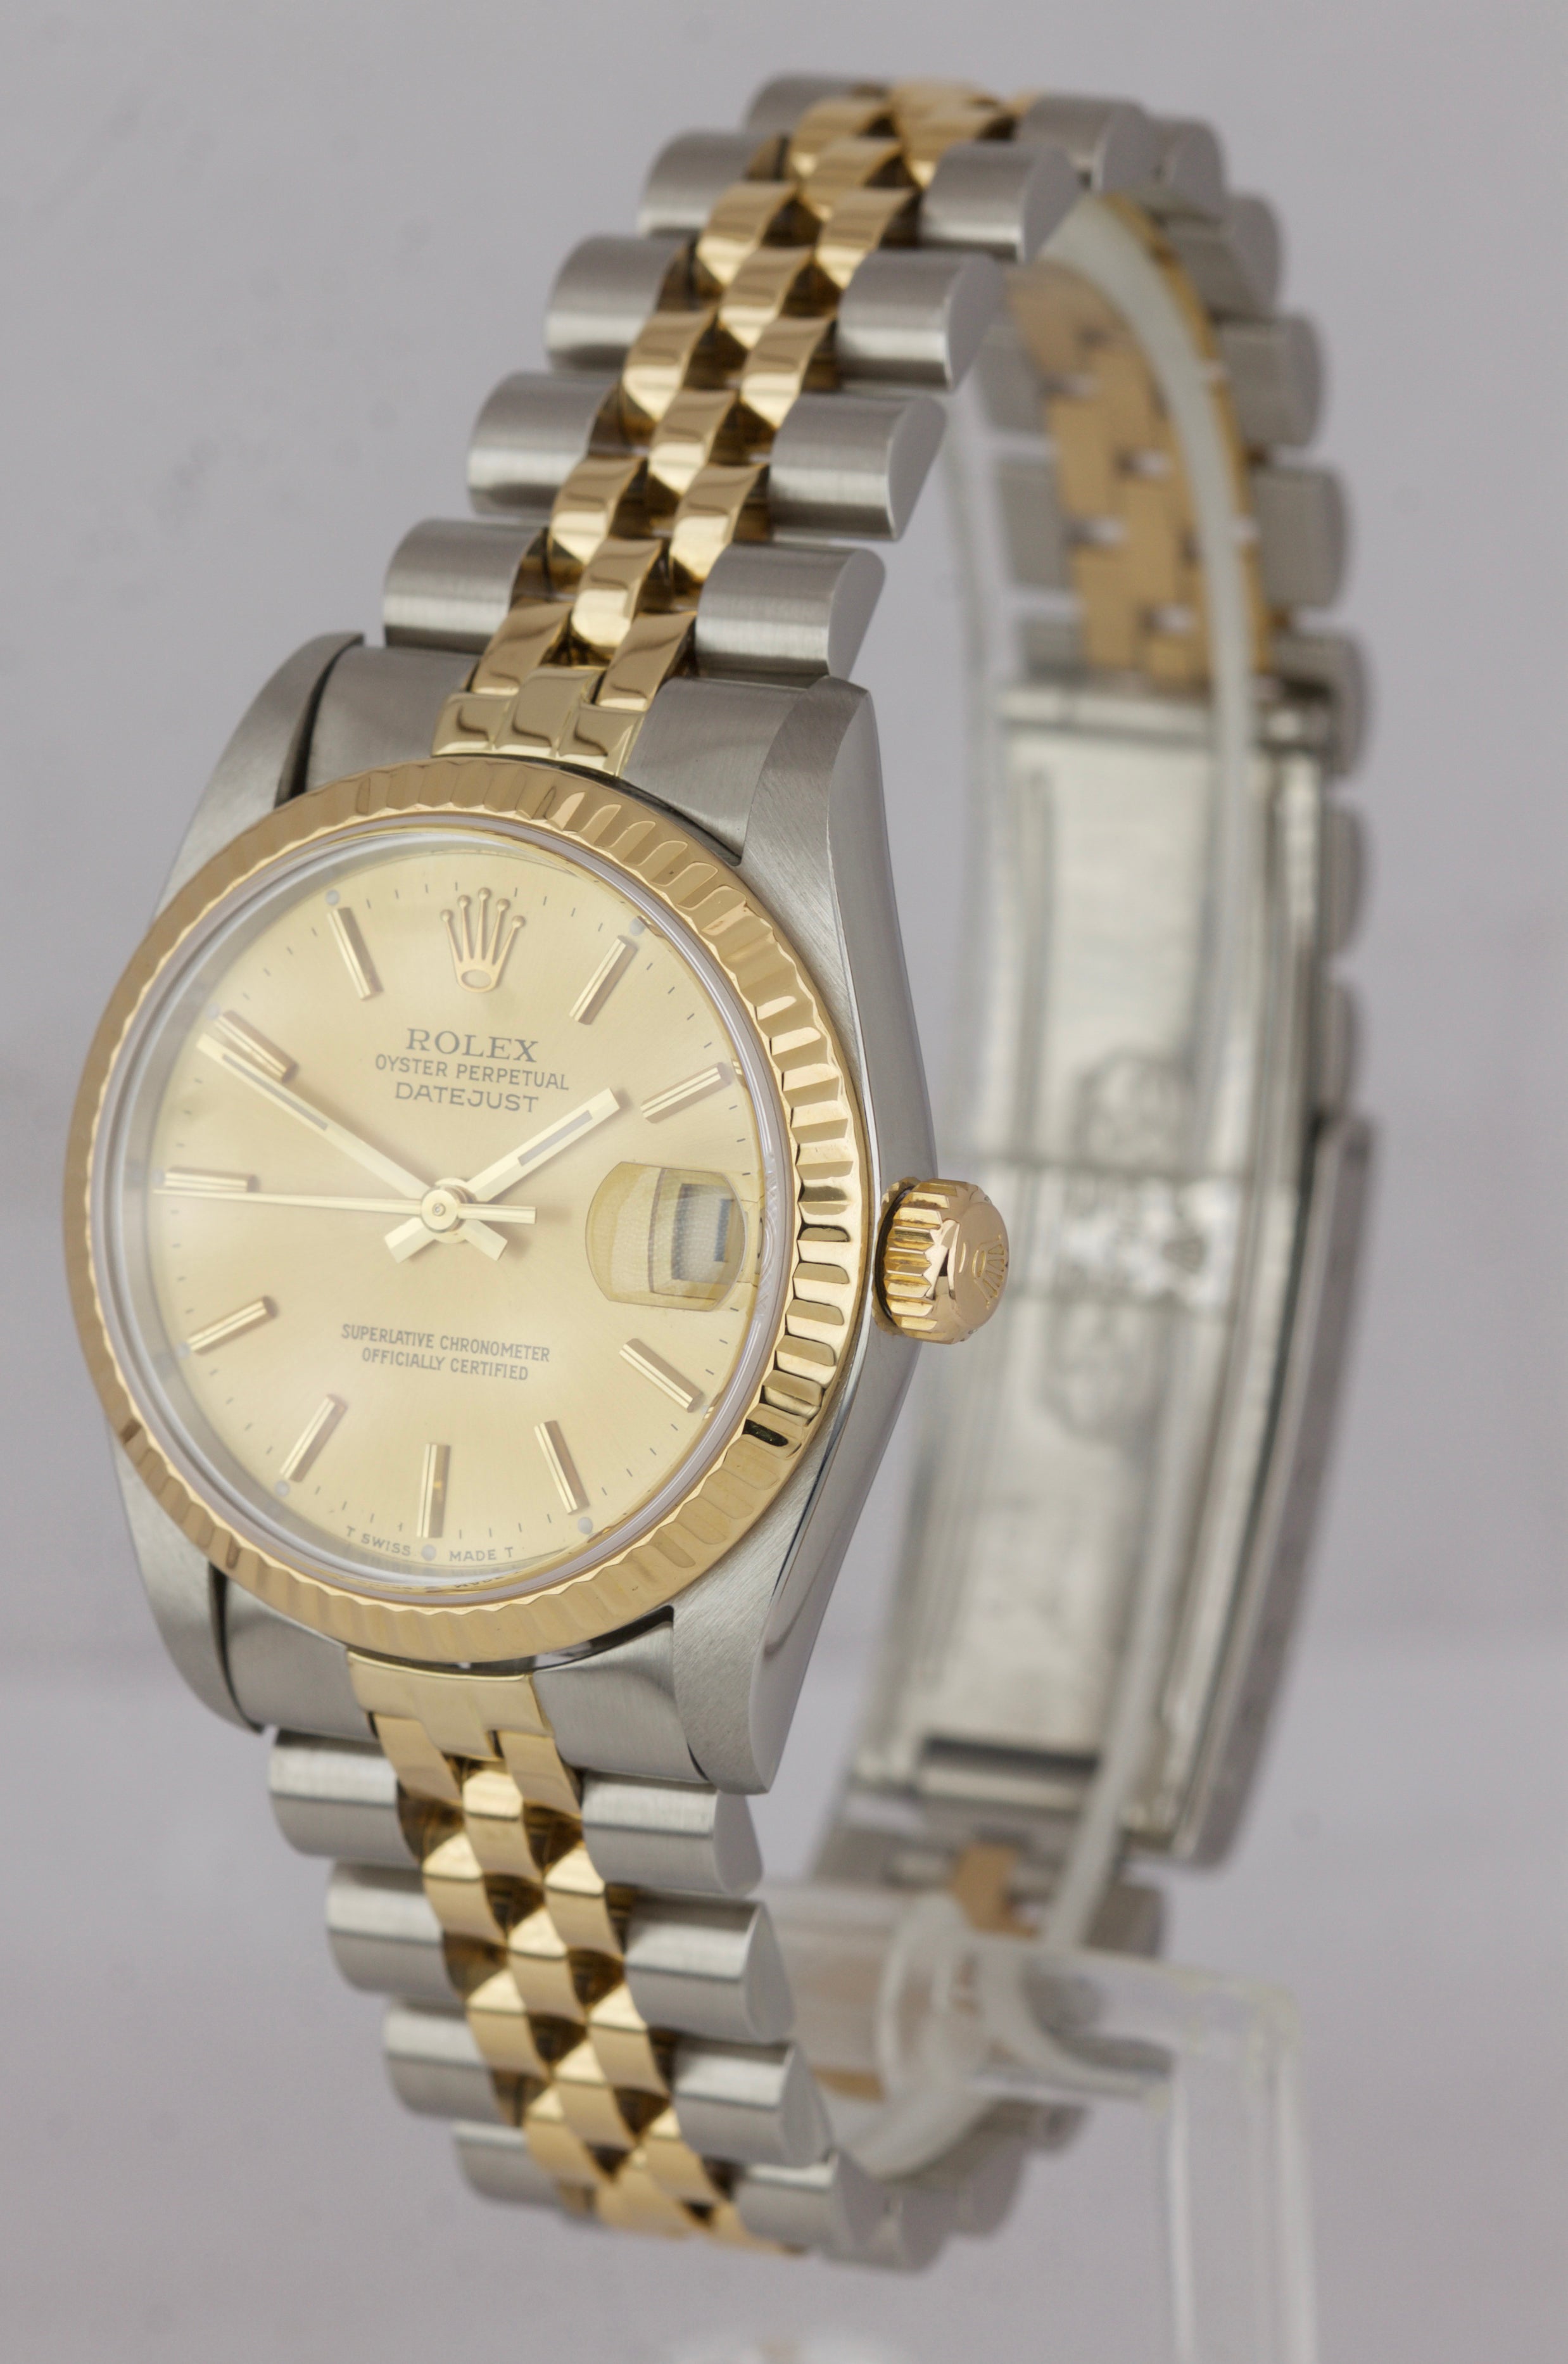 2019 SERVICED Rolex DateJust 31mm Midsize TwoTone 18K Gold 68273 Champagne Watch